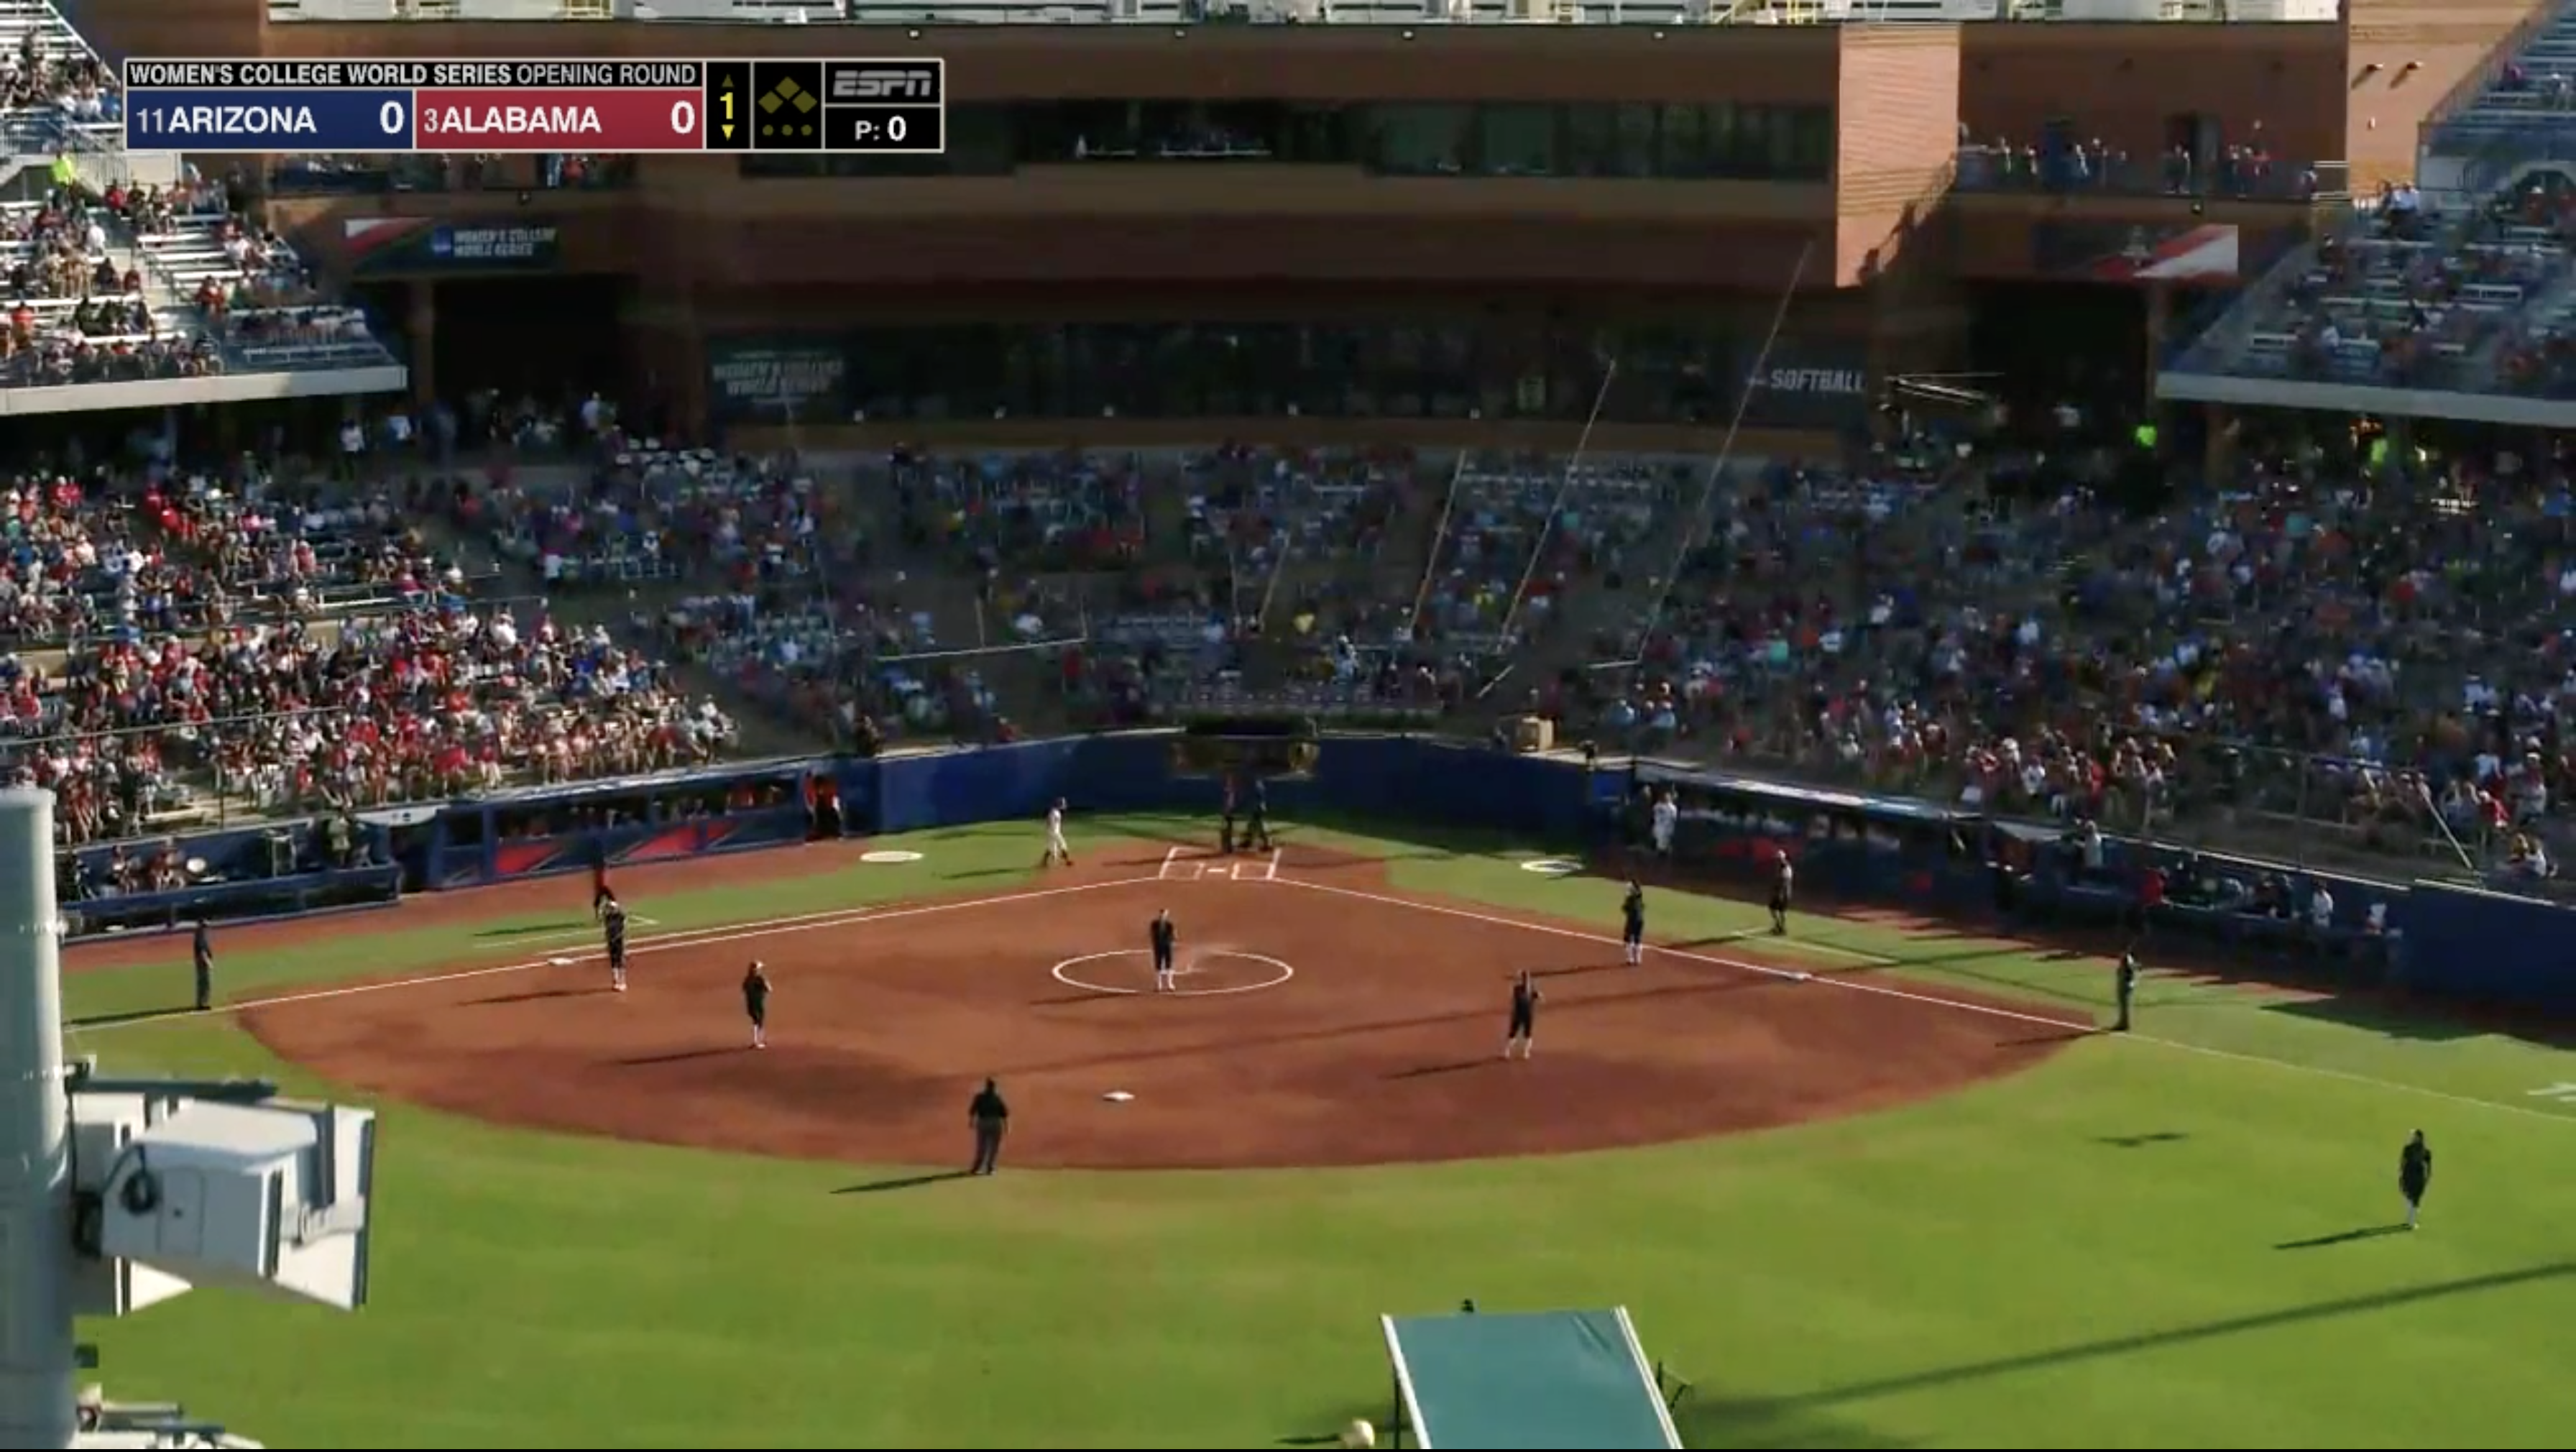 Women S College World Series Espn Celebrates th Year In Okc With 80 Ft Rail Cam Cable Cam Drone